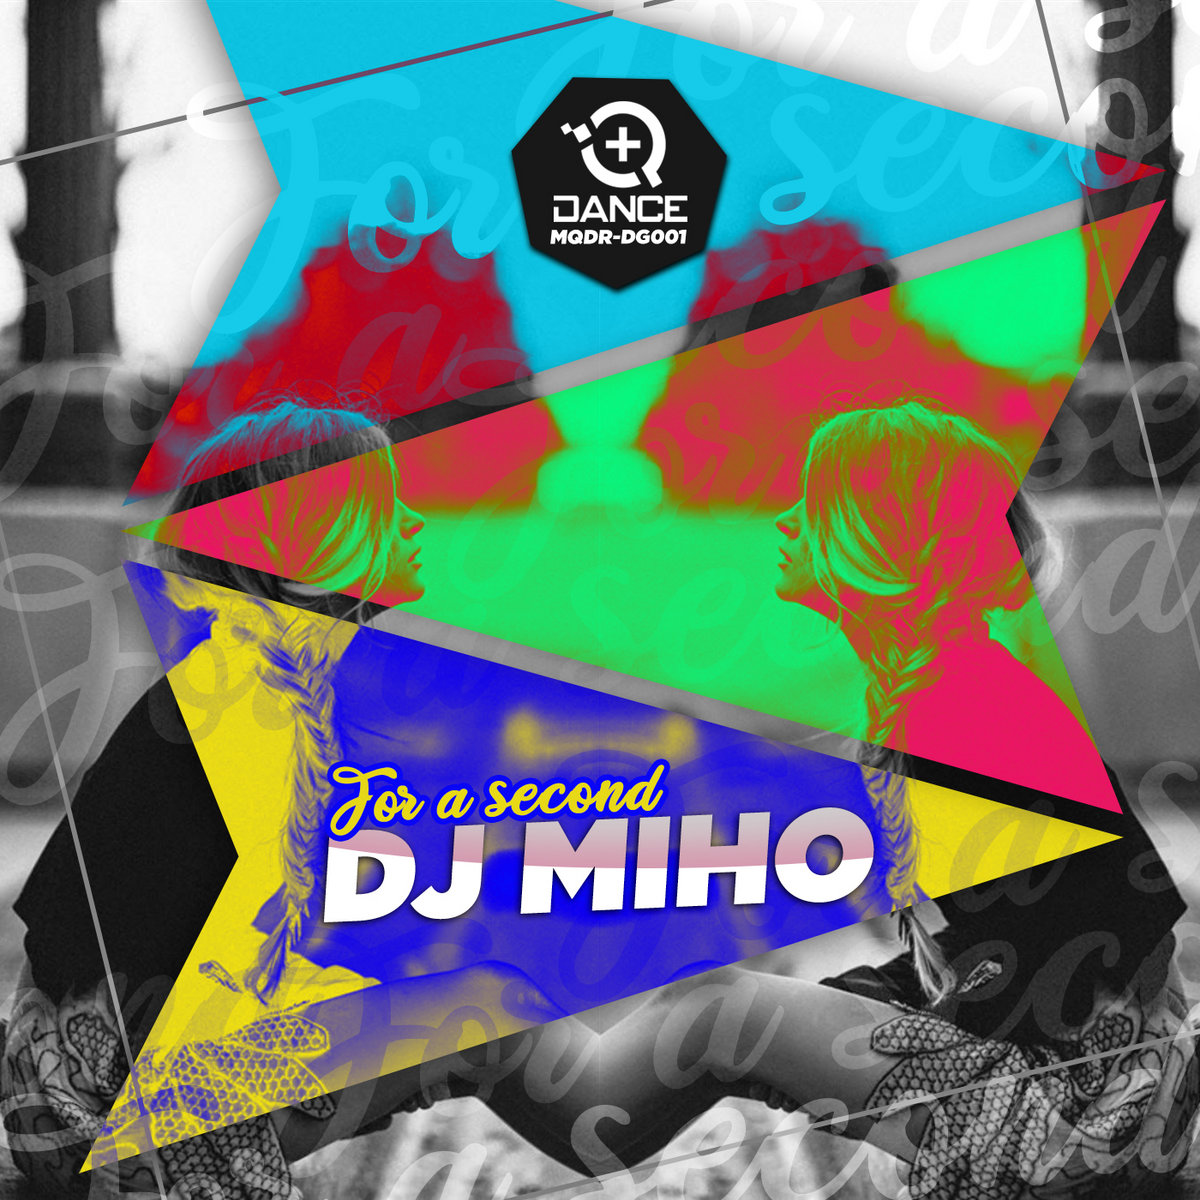 [MQDR-DG001] DJ Miho - For A Second (Ya a la Venta / Out Now) A0653689664_10